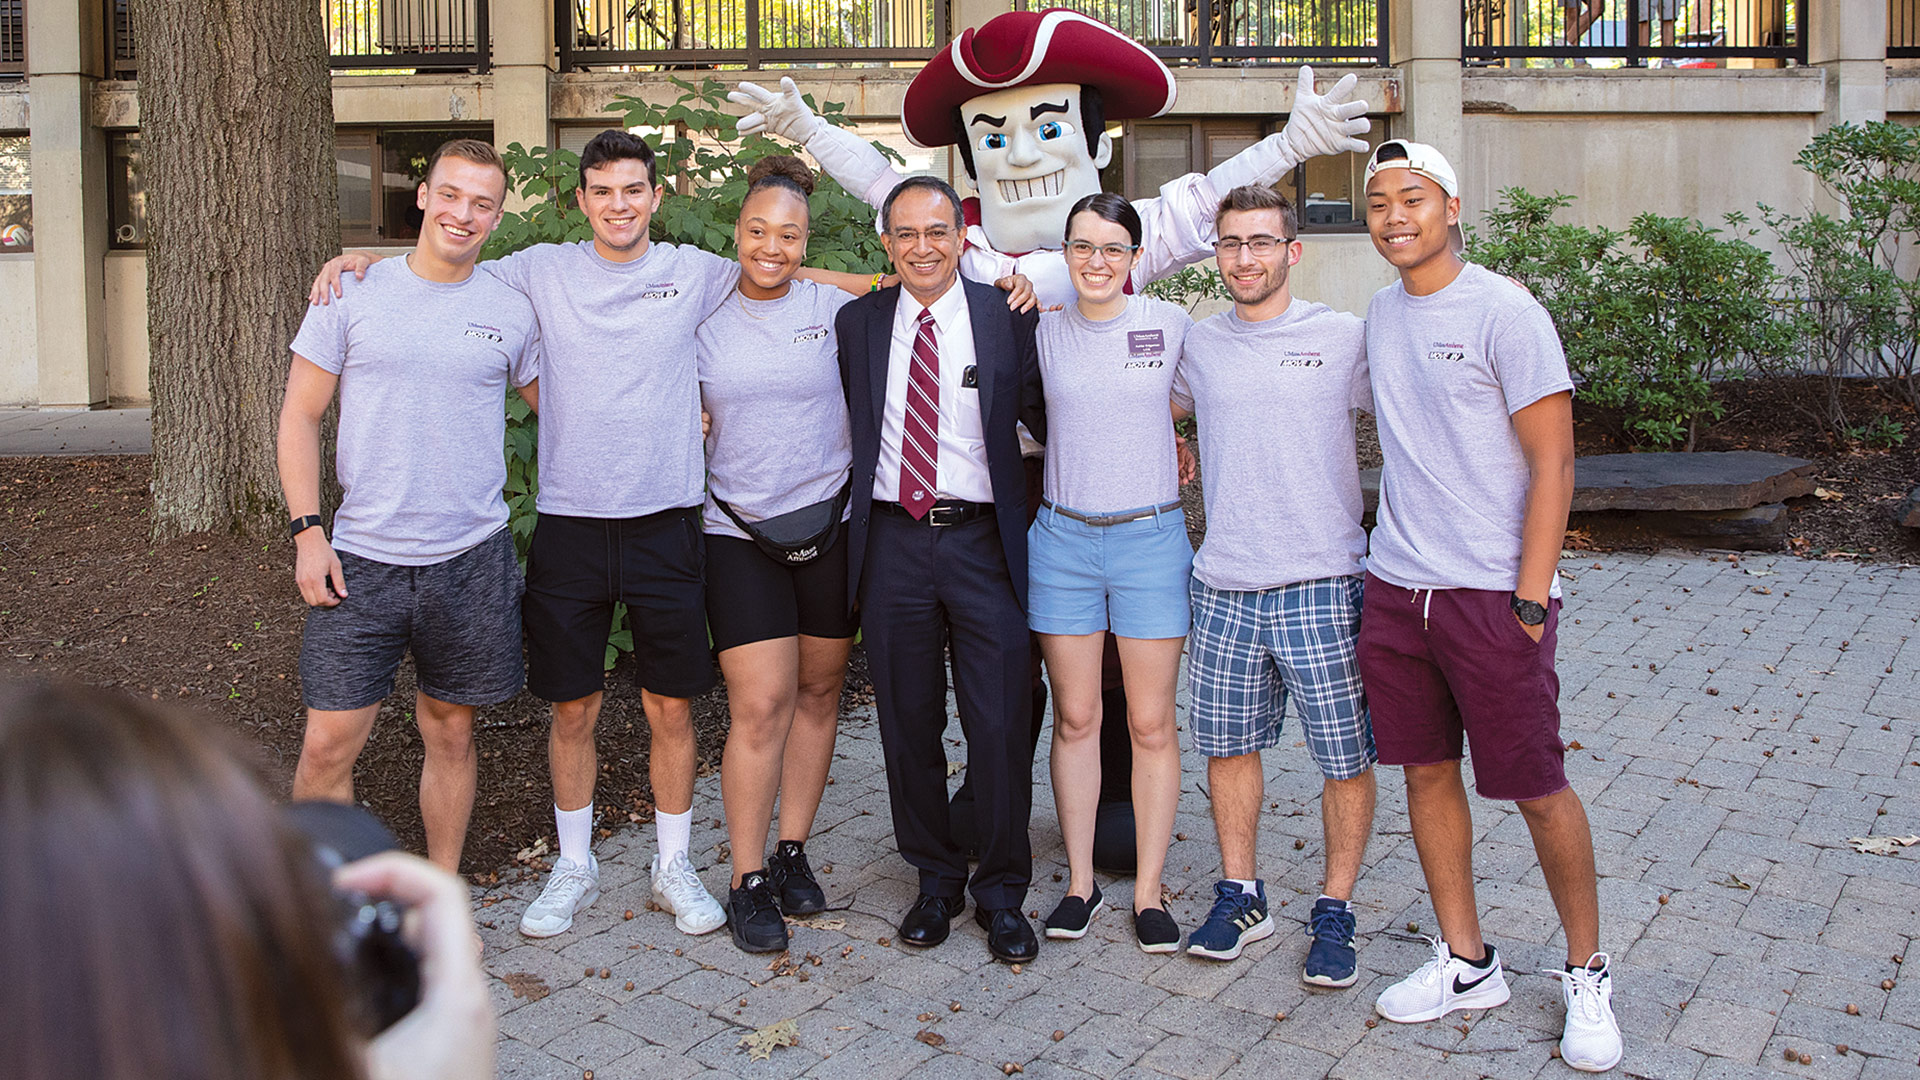 chancellor in recent history at UMass Amherst